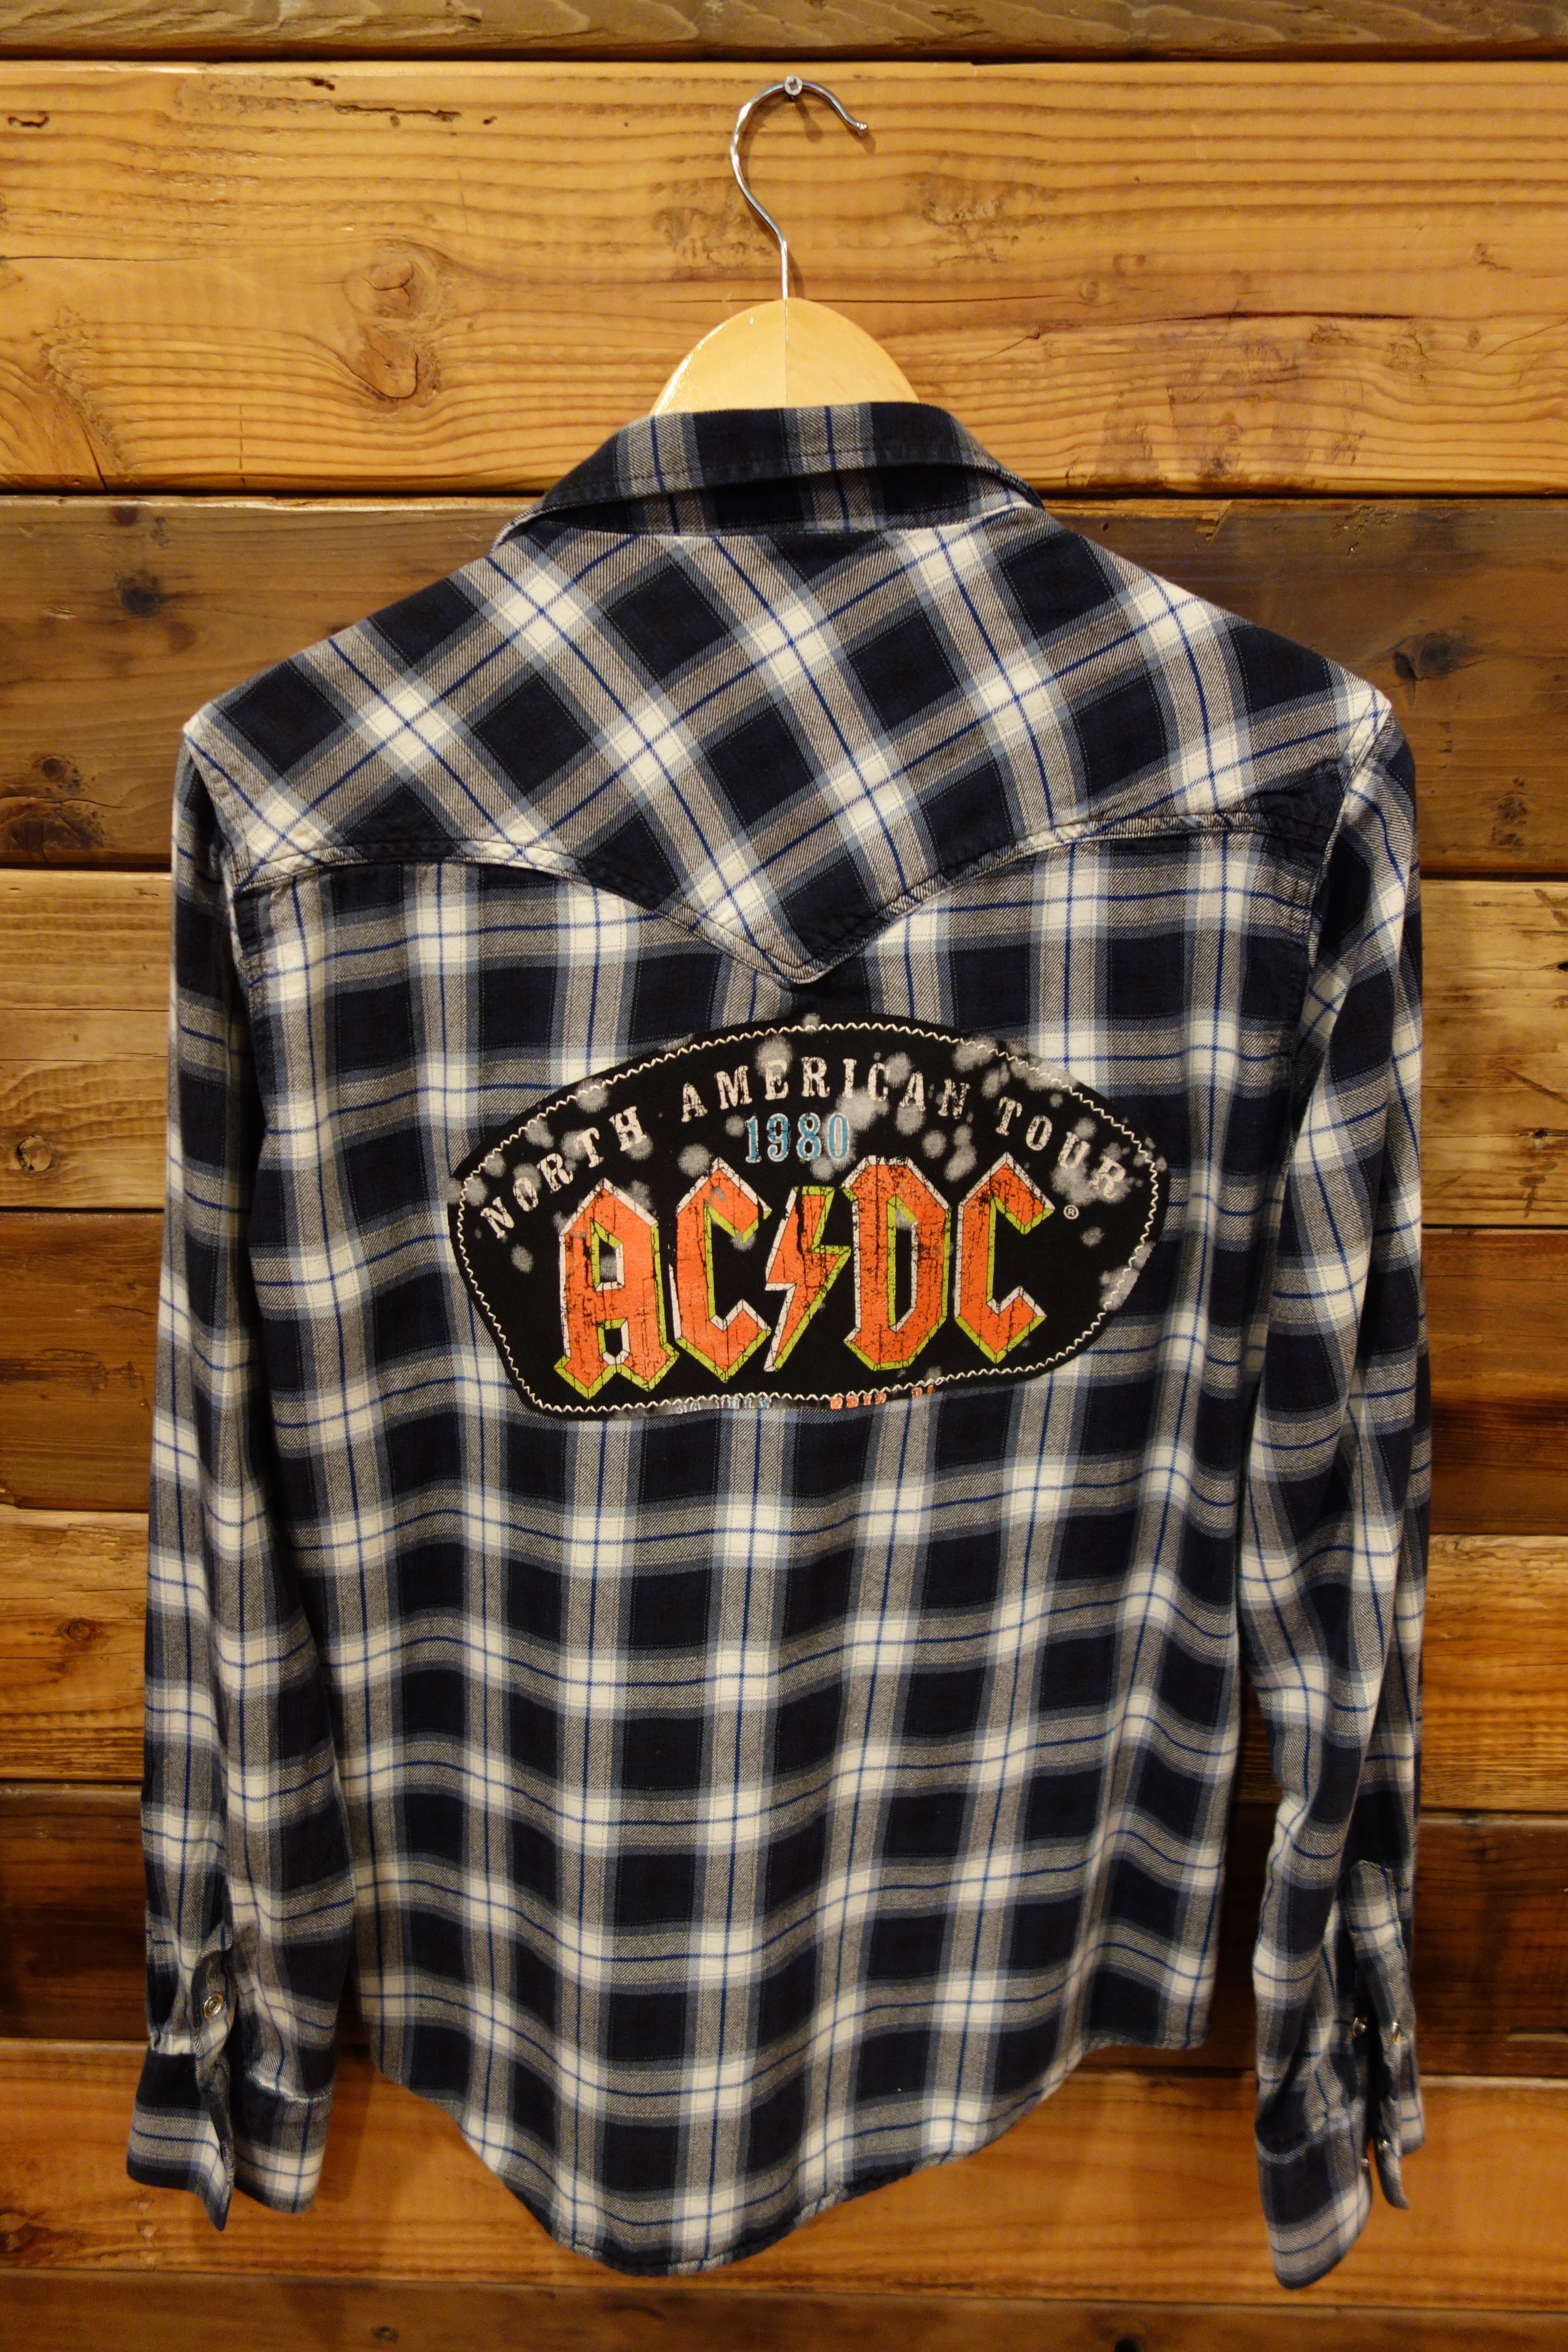 Christian Audigier flannel, one of a kind, AC?DC 1980 concert tee